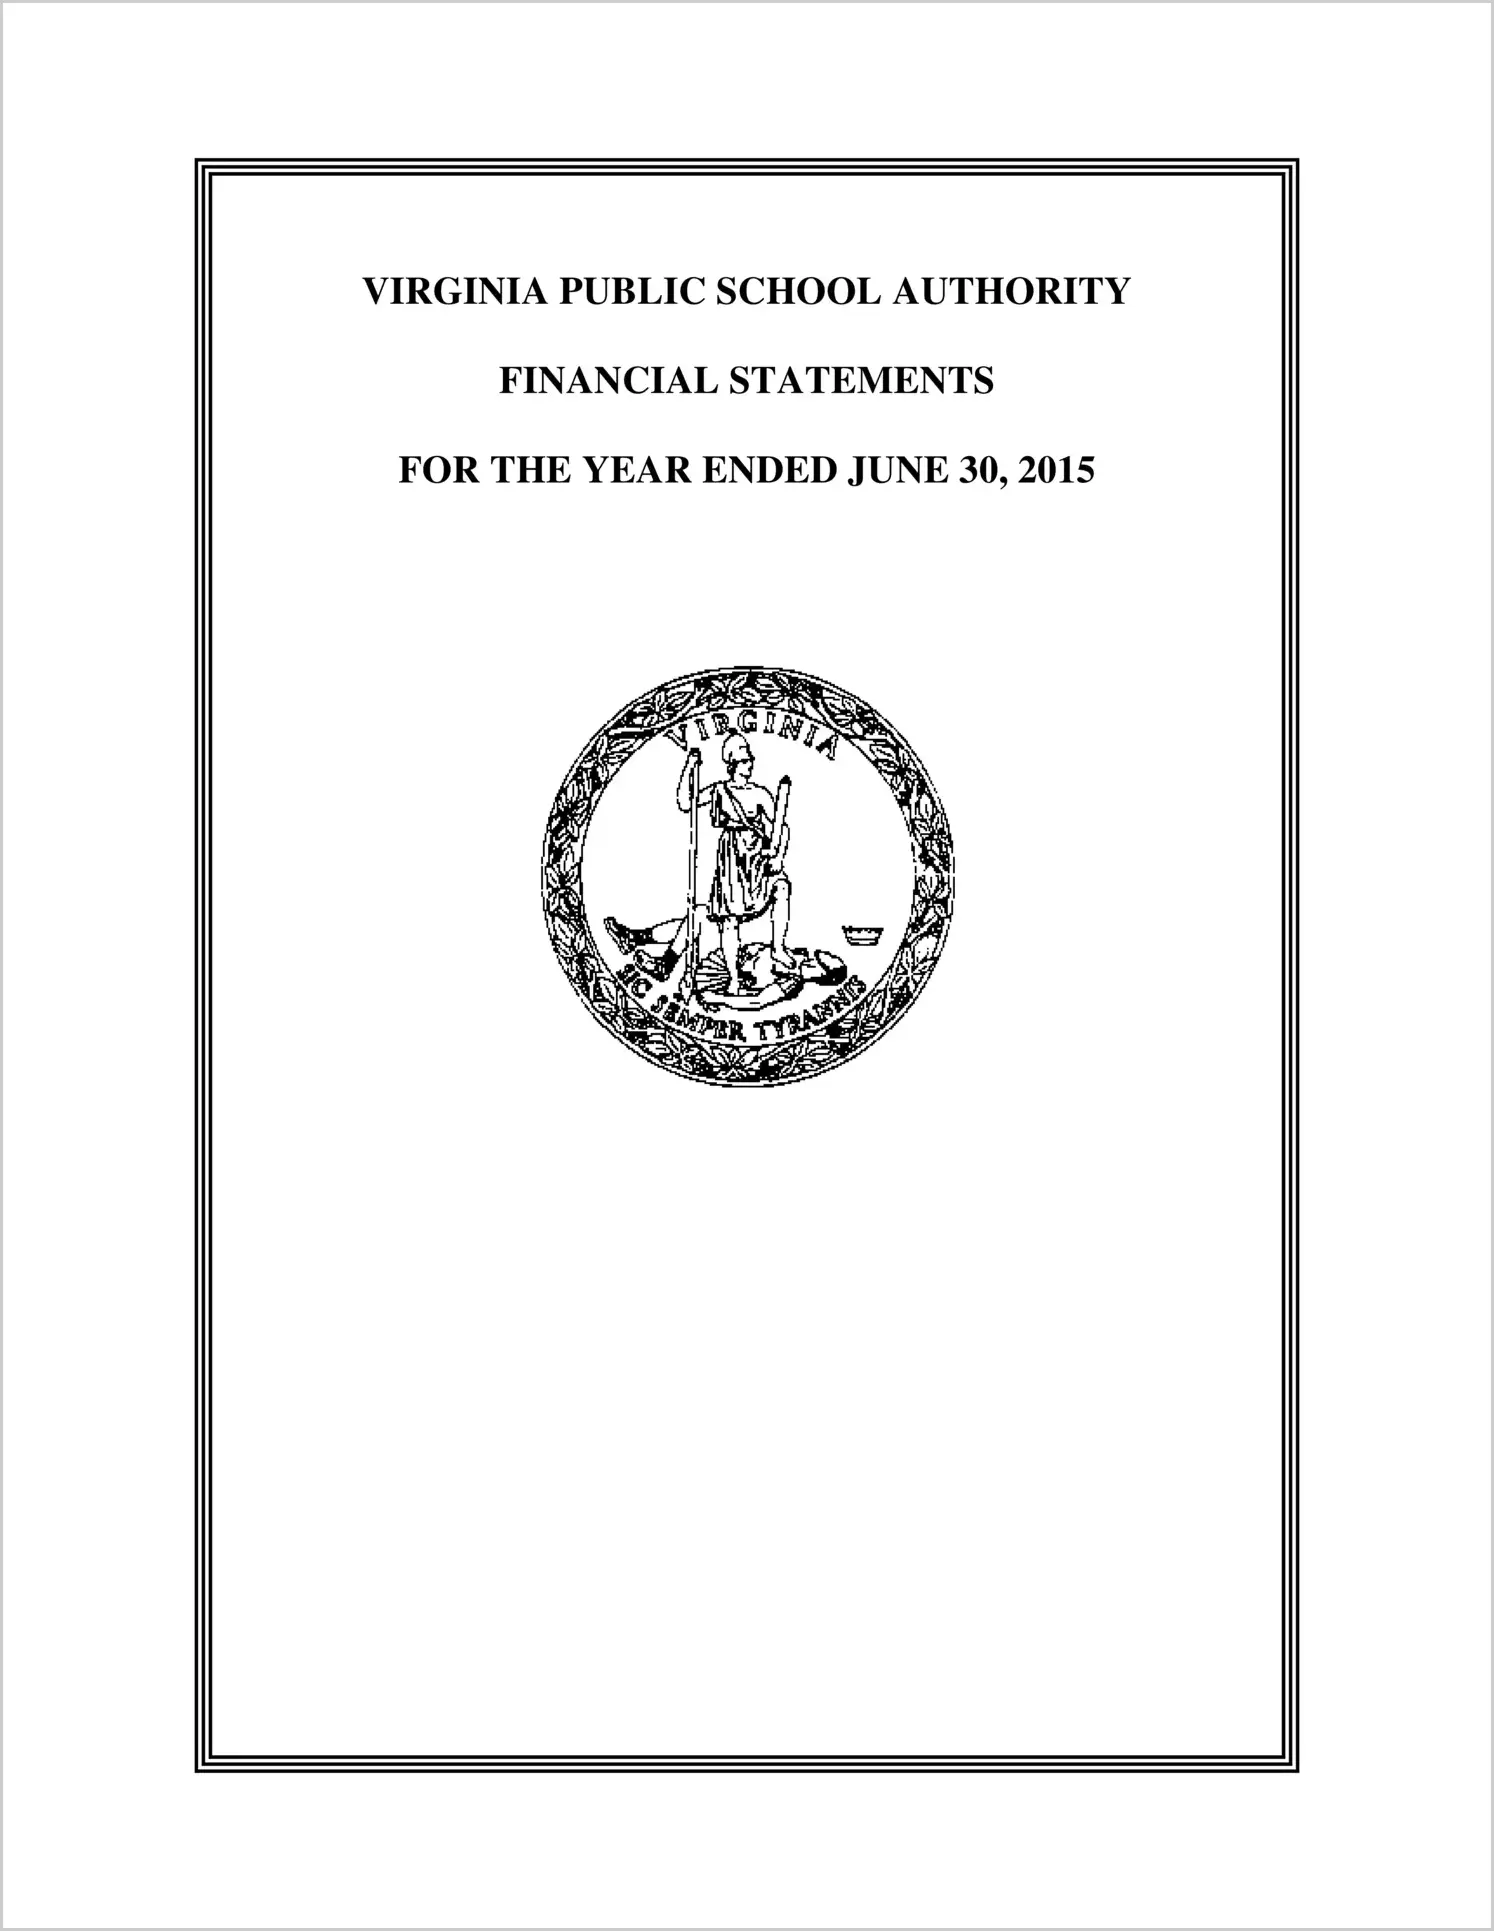 Virginia Public School Authority Financial Statements for the year ended June 30, 2015